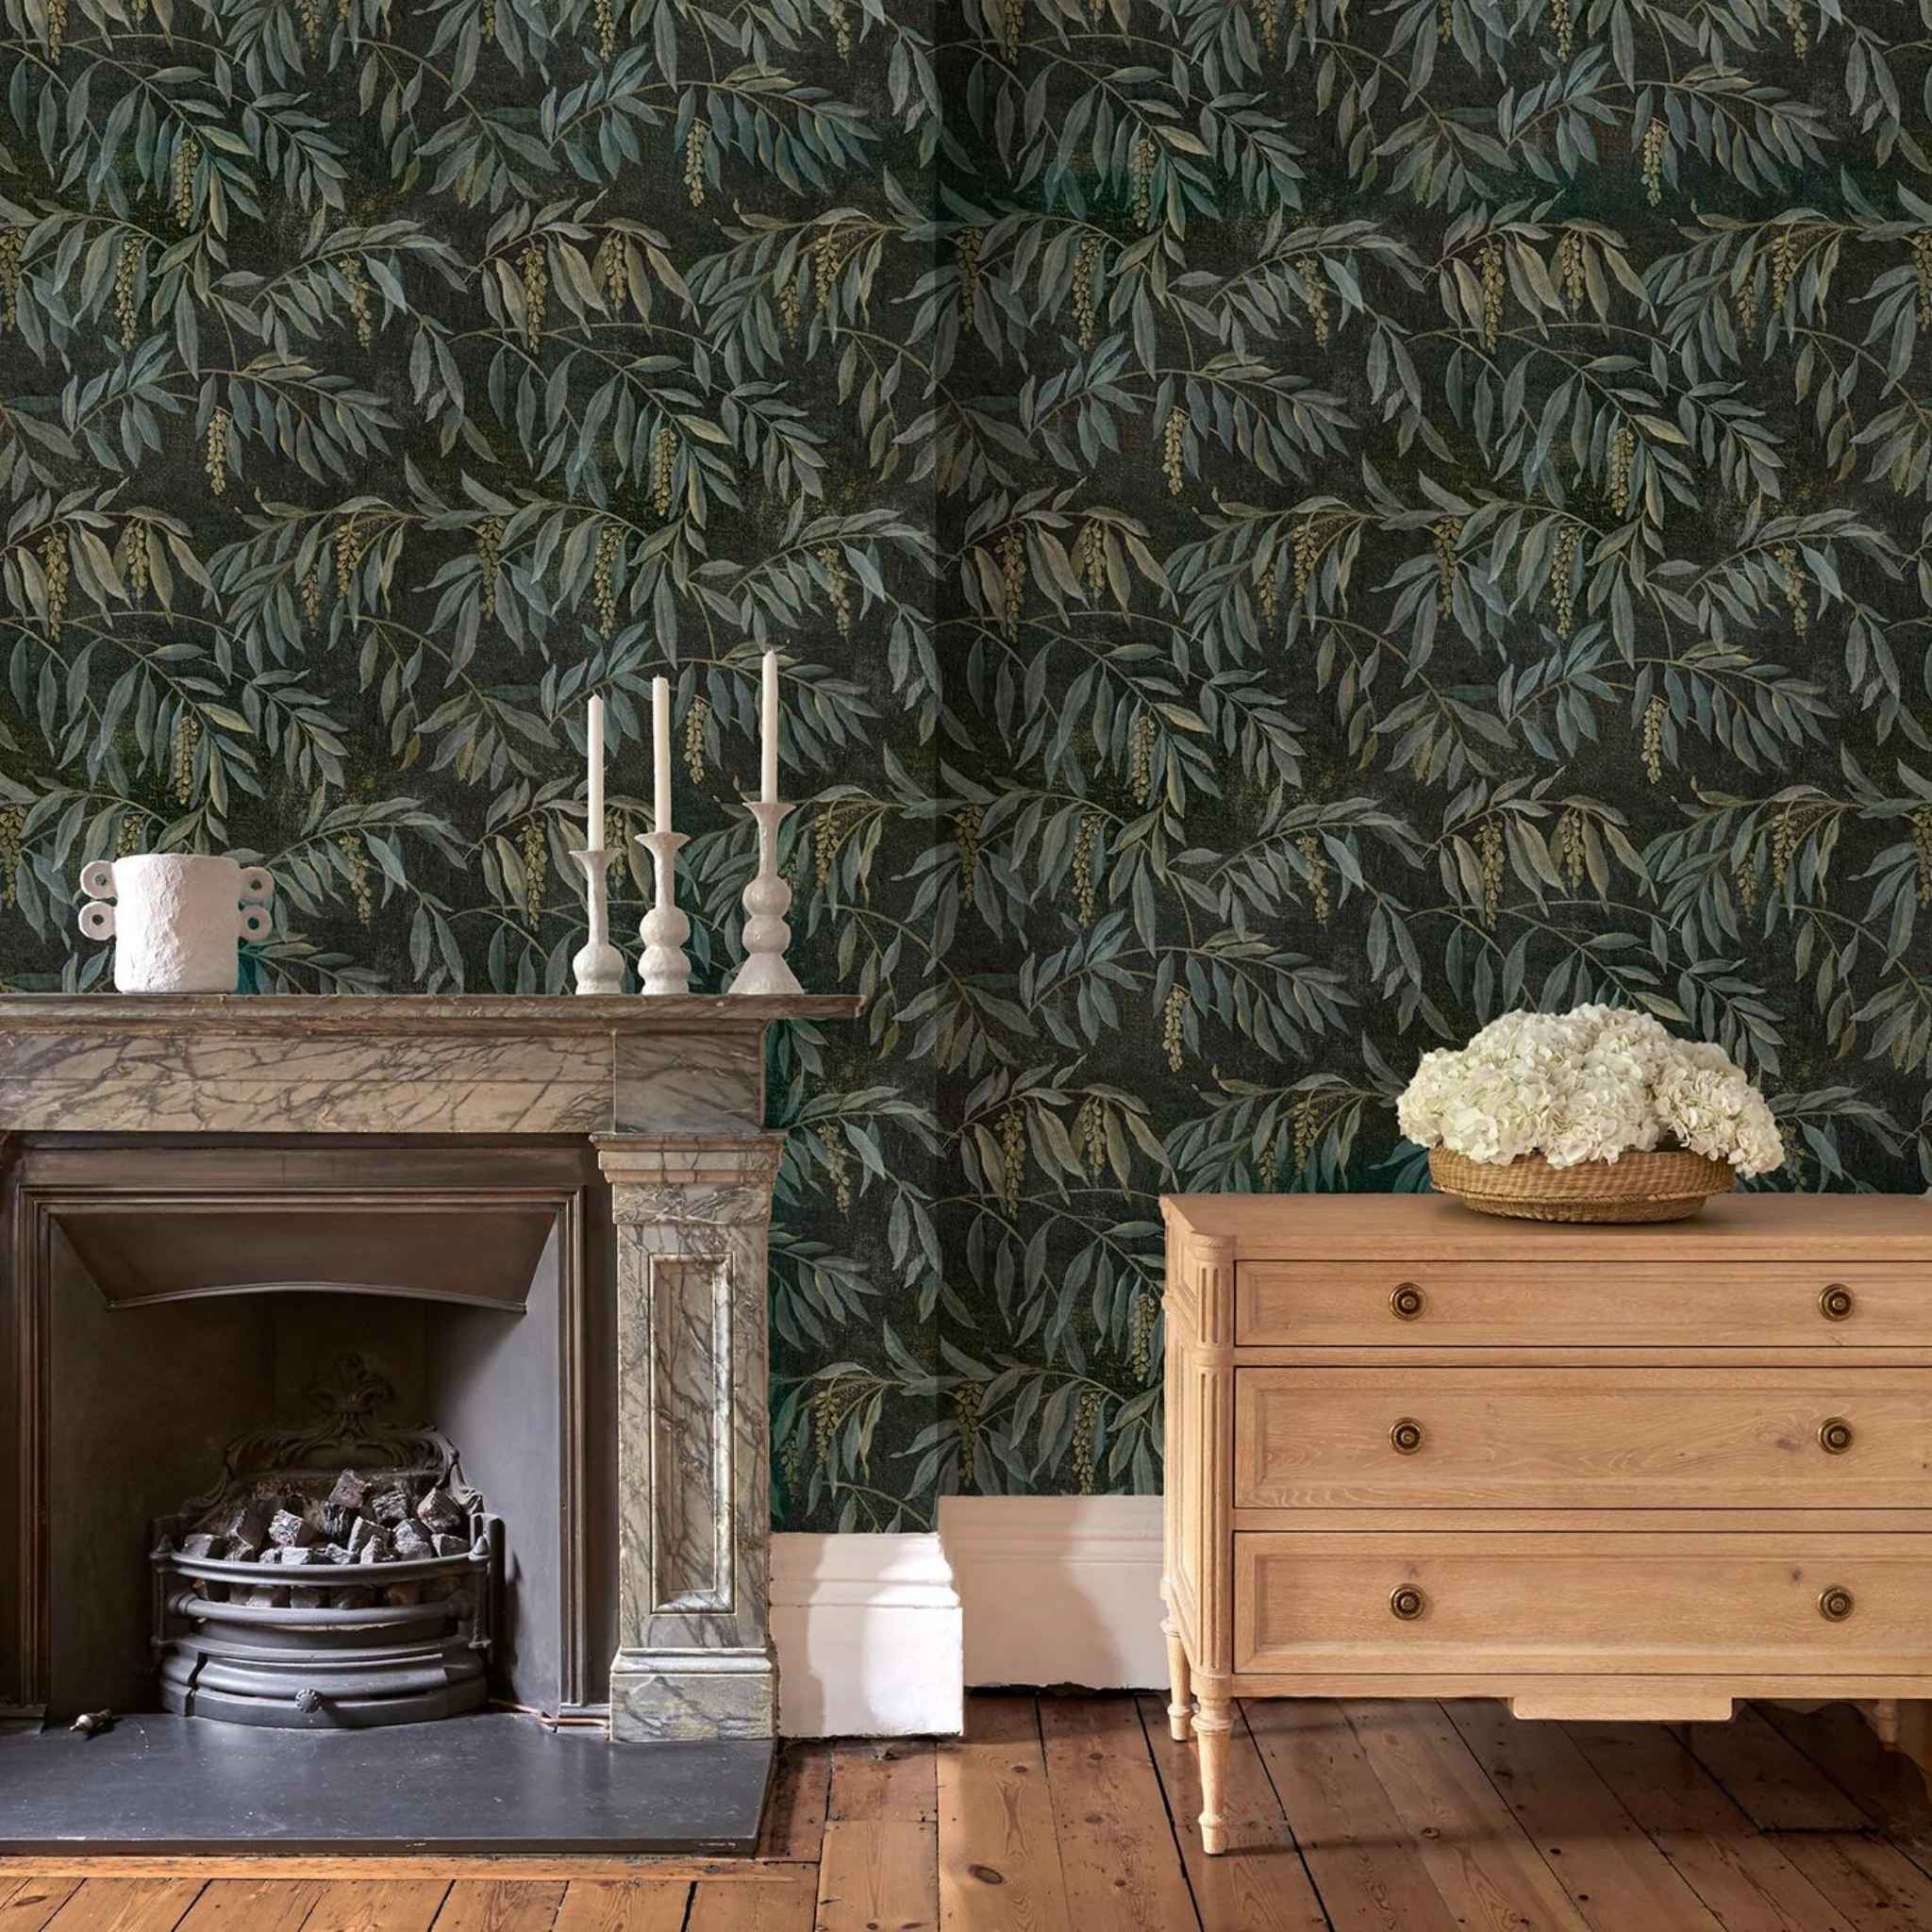 wallpaper linen collections, Linwood Introduce Wallpaper and Linen Collections with Detailed Patterns